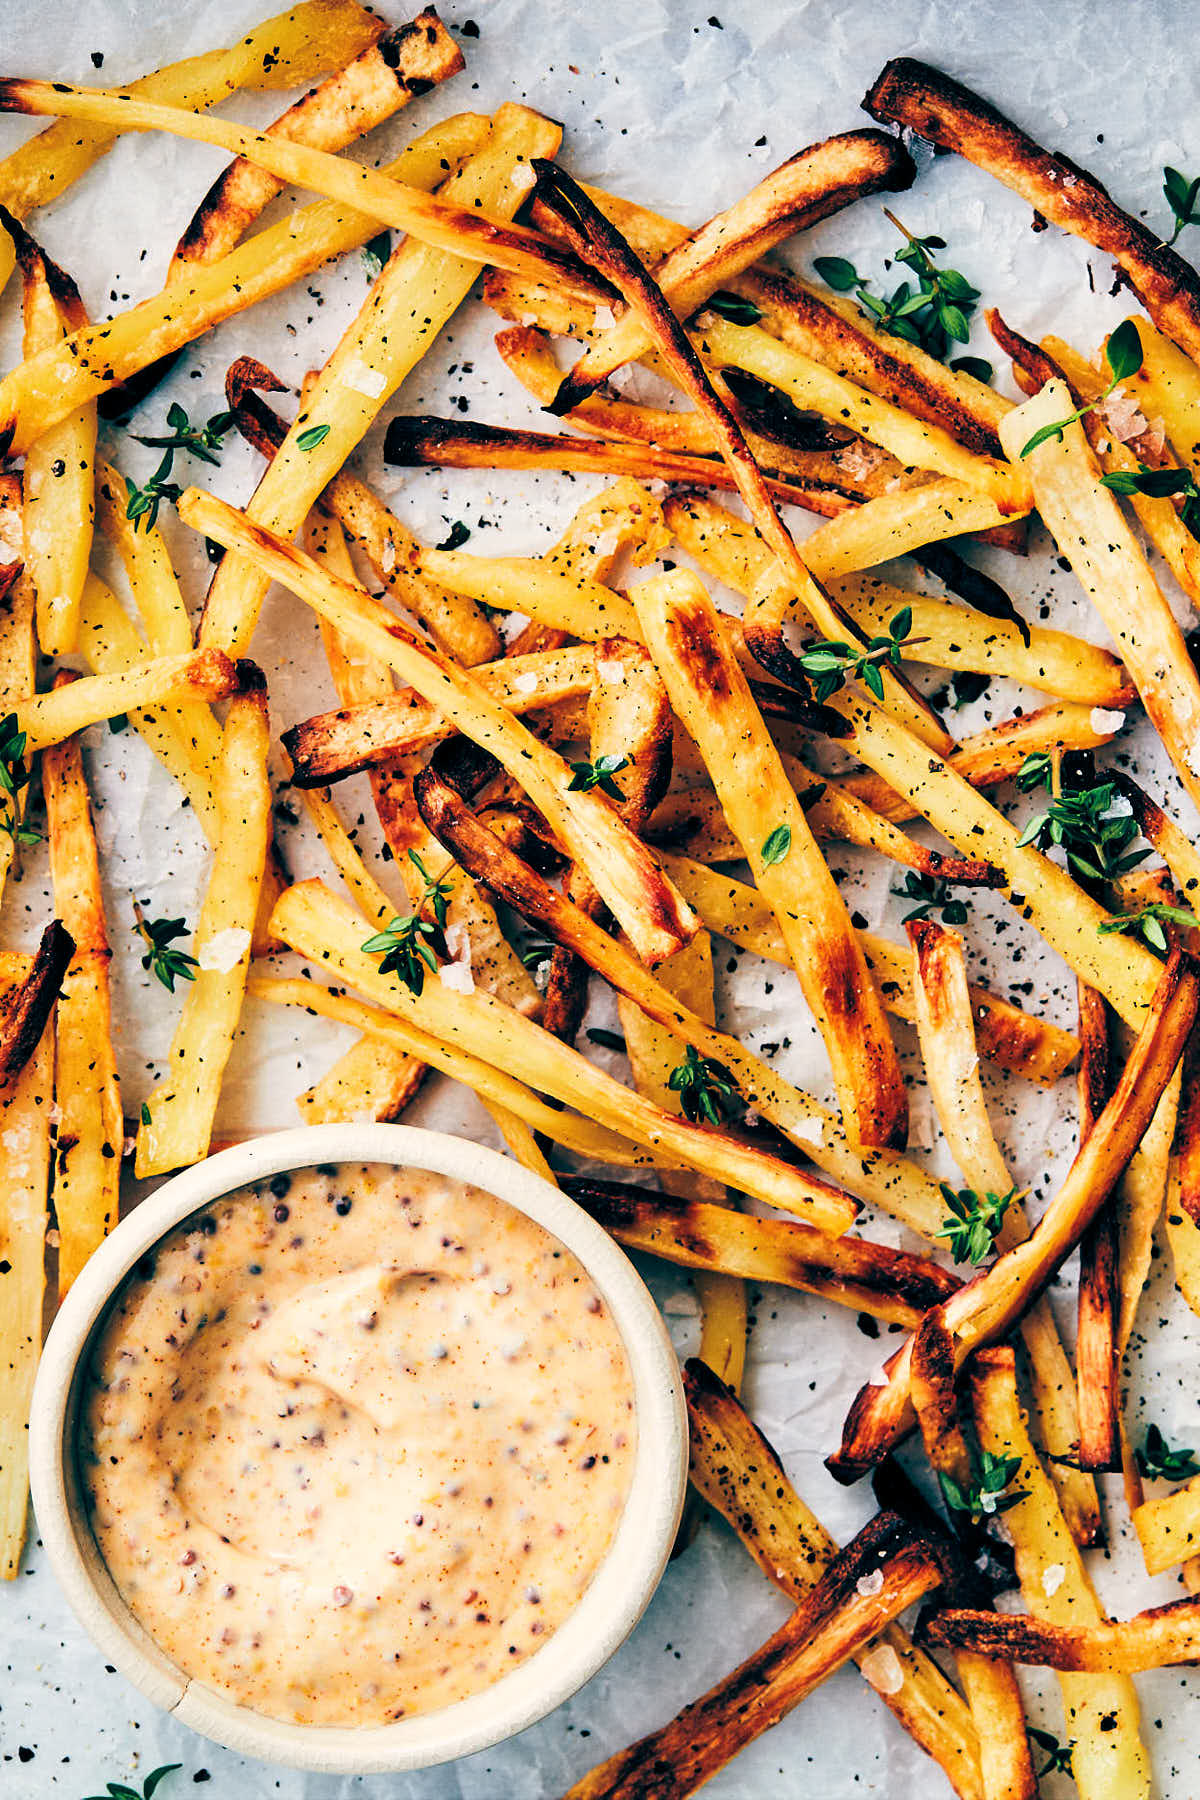 Baking sheet of parsnip fries fresh out of the oven with easy vegan dijon aioli